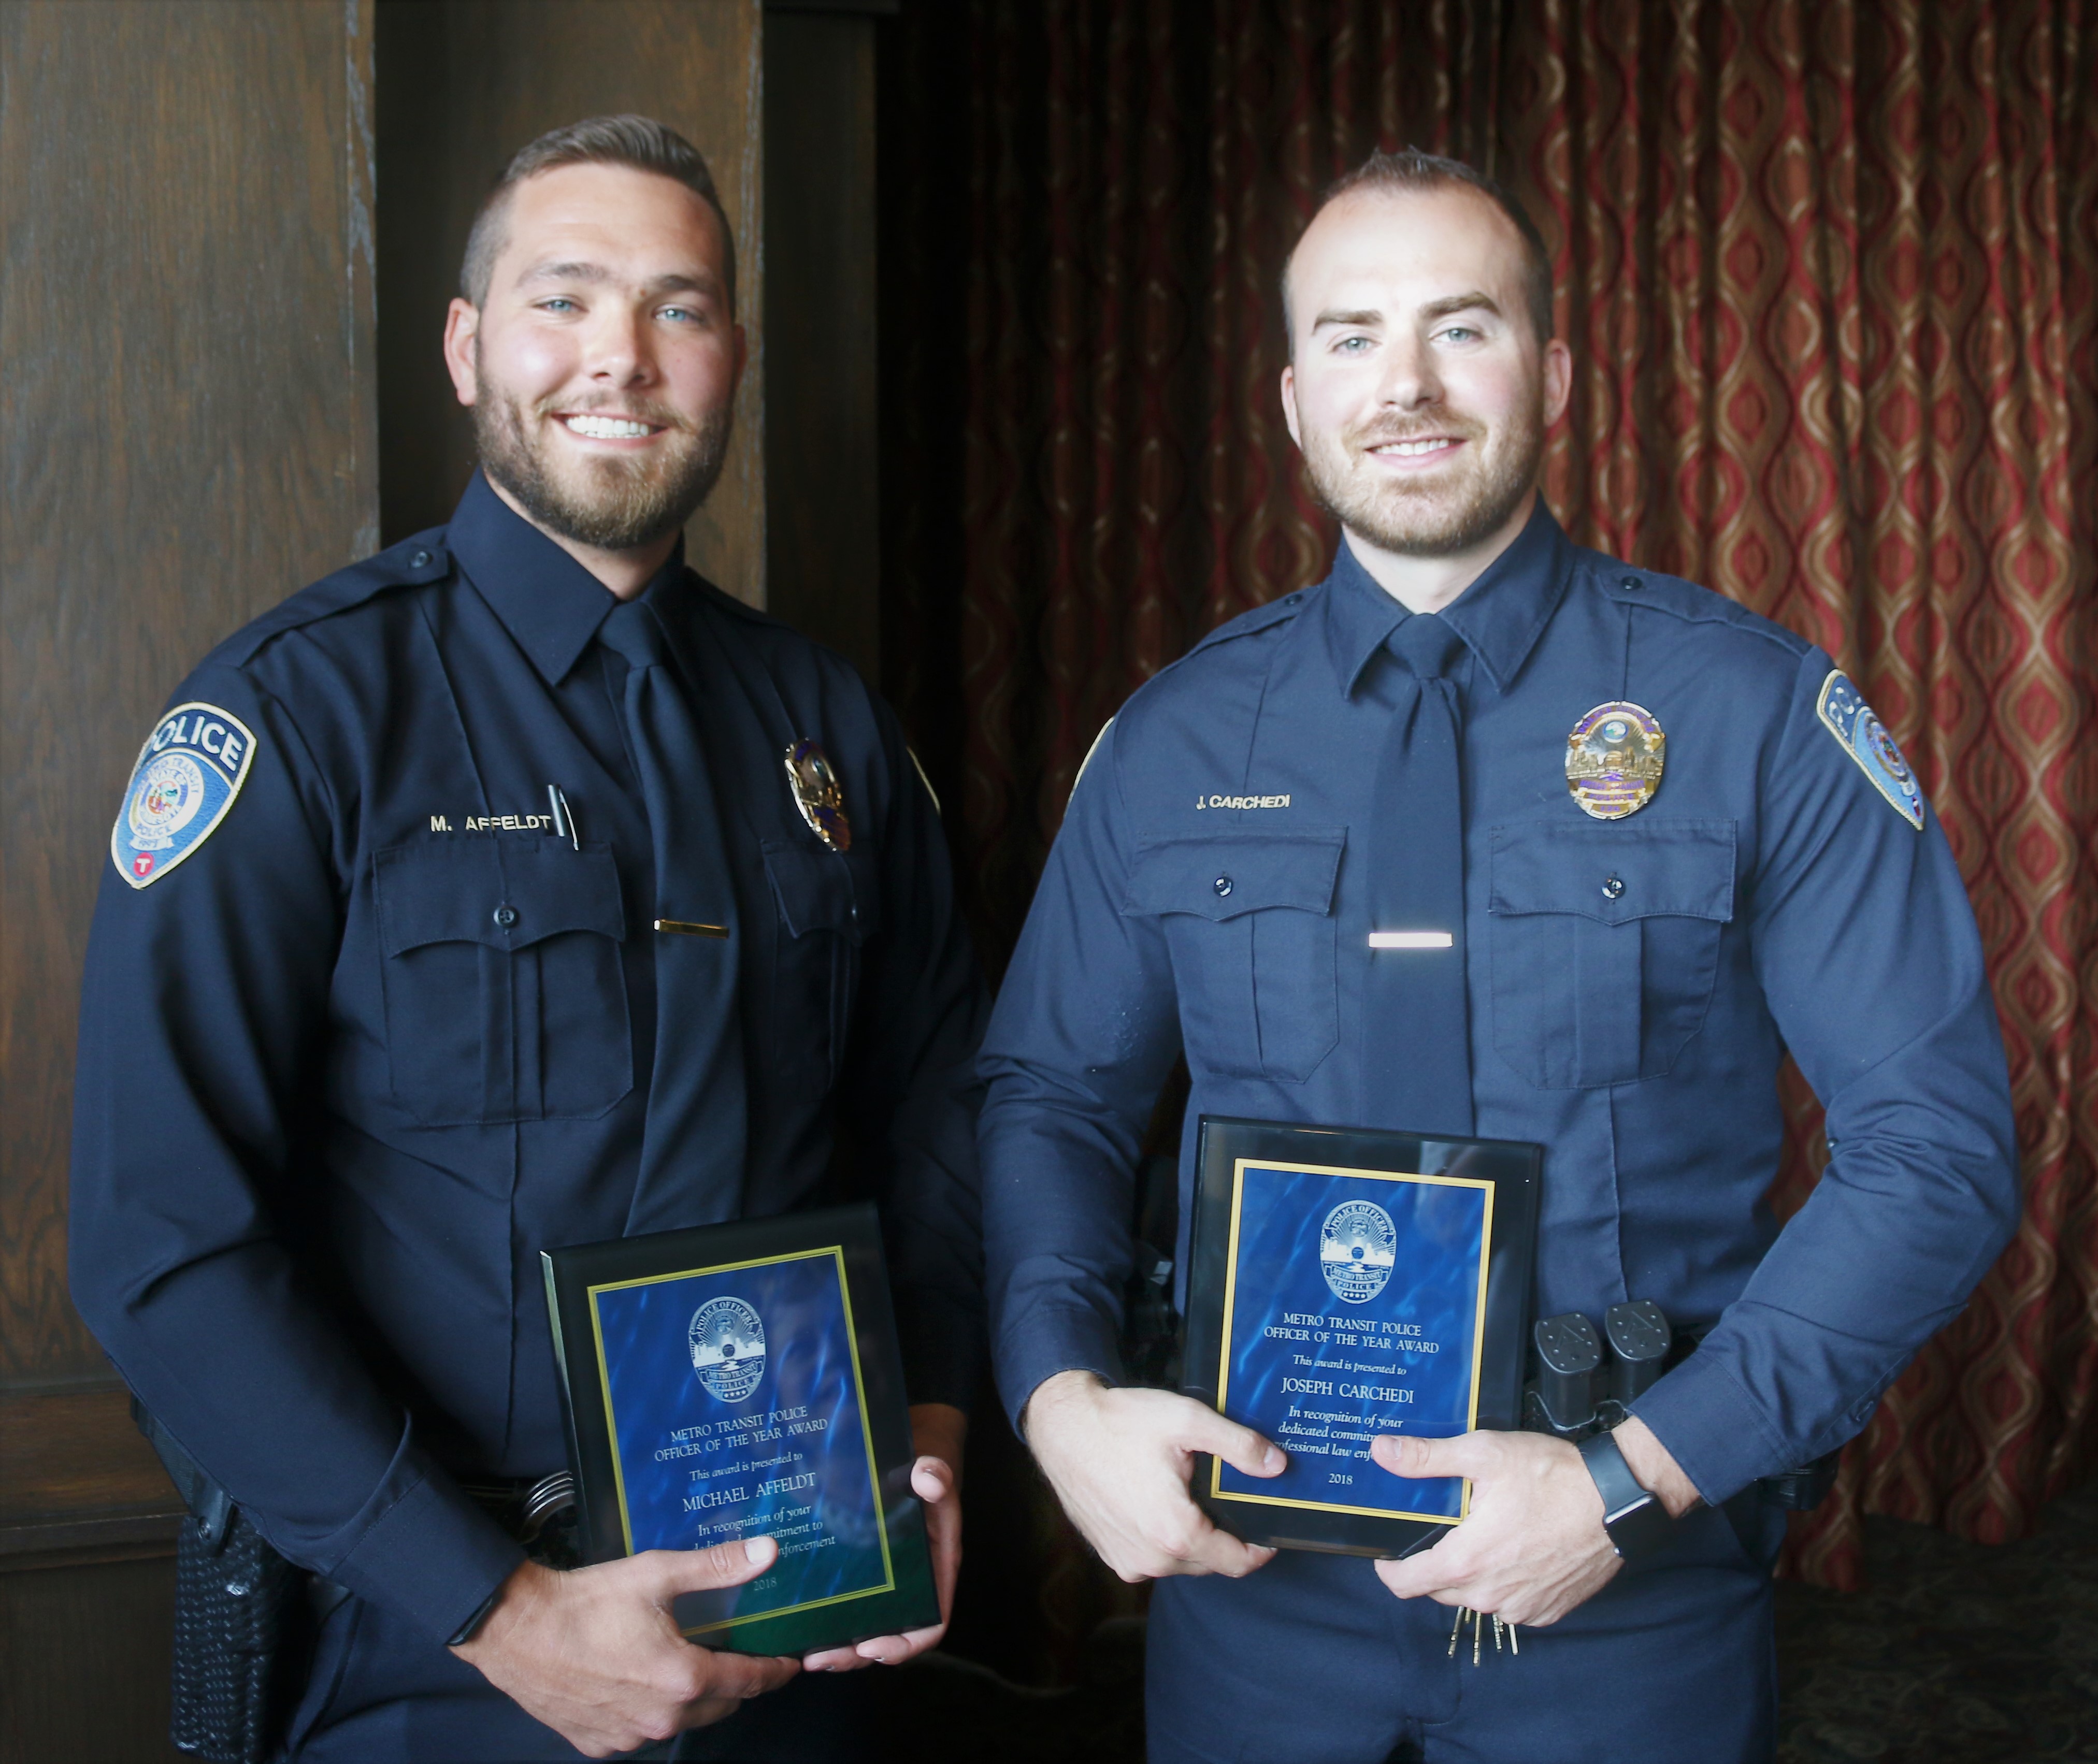 MTPD Officers of the Year Michael Affeldt (left) and Joe Carchedi